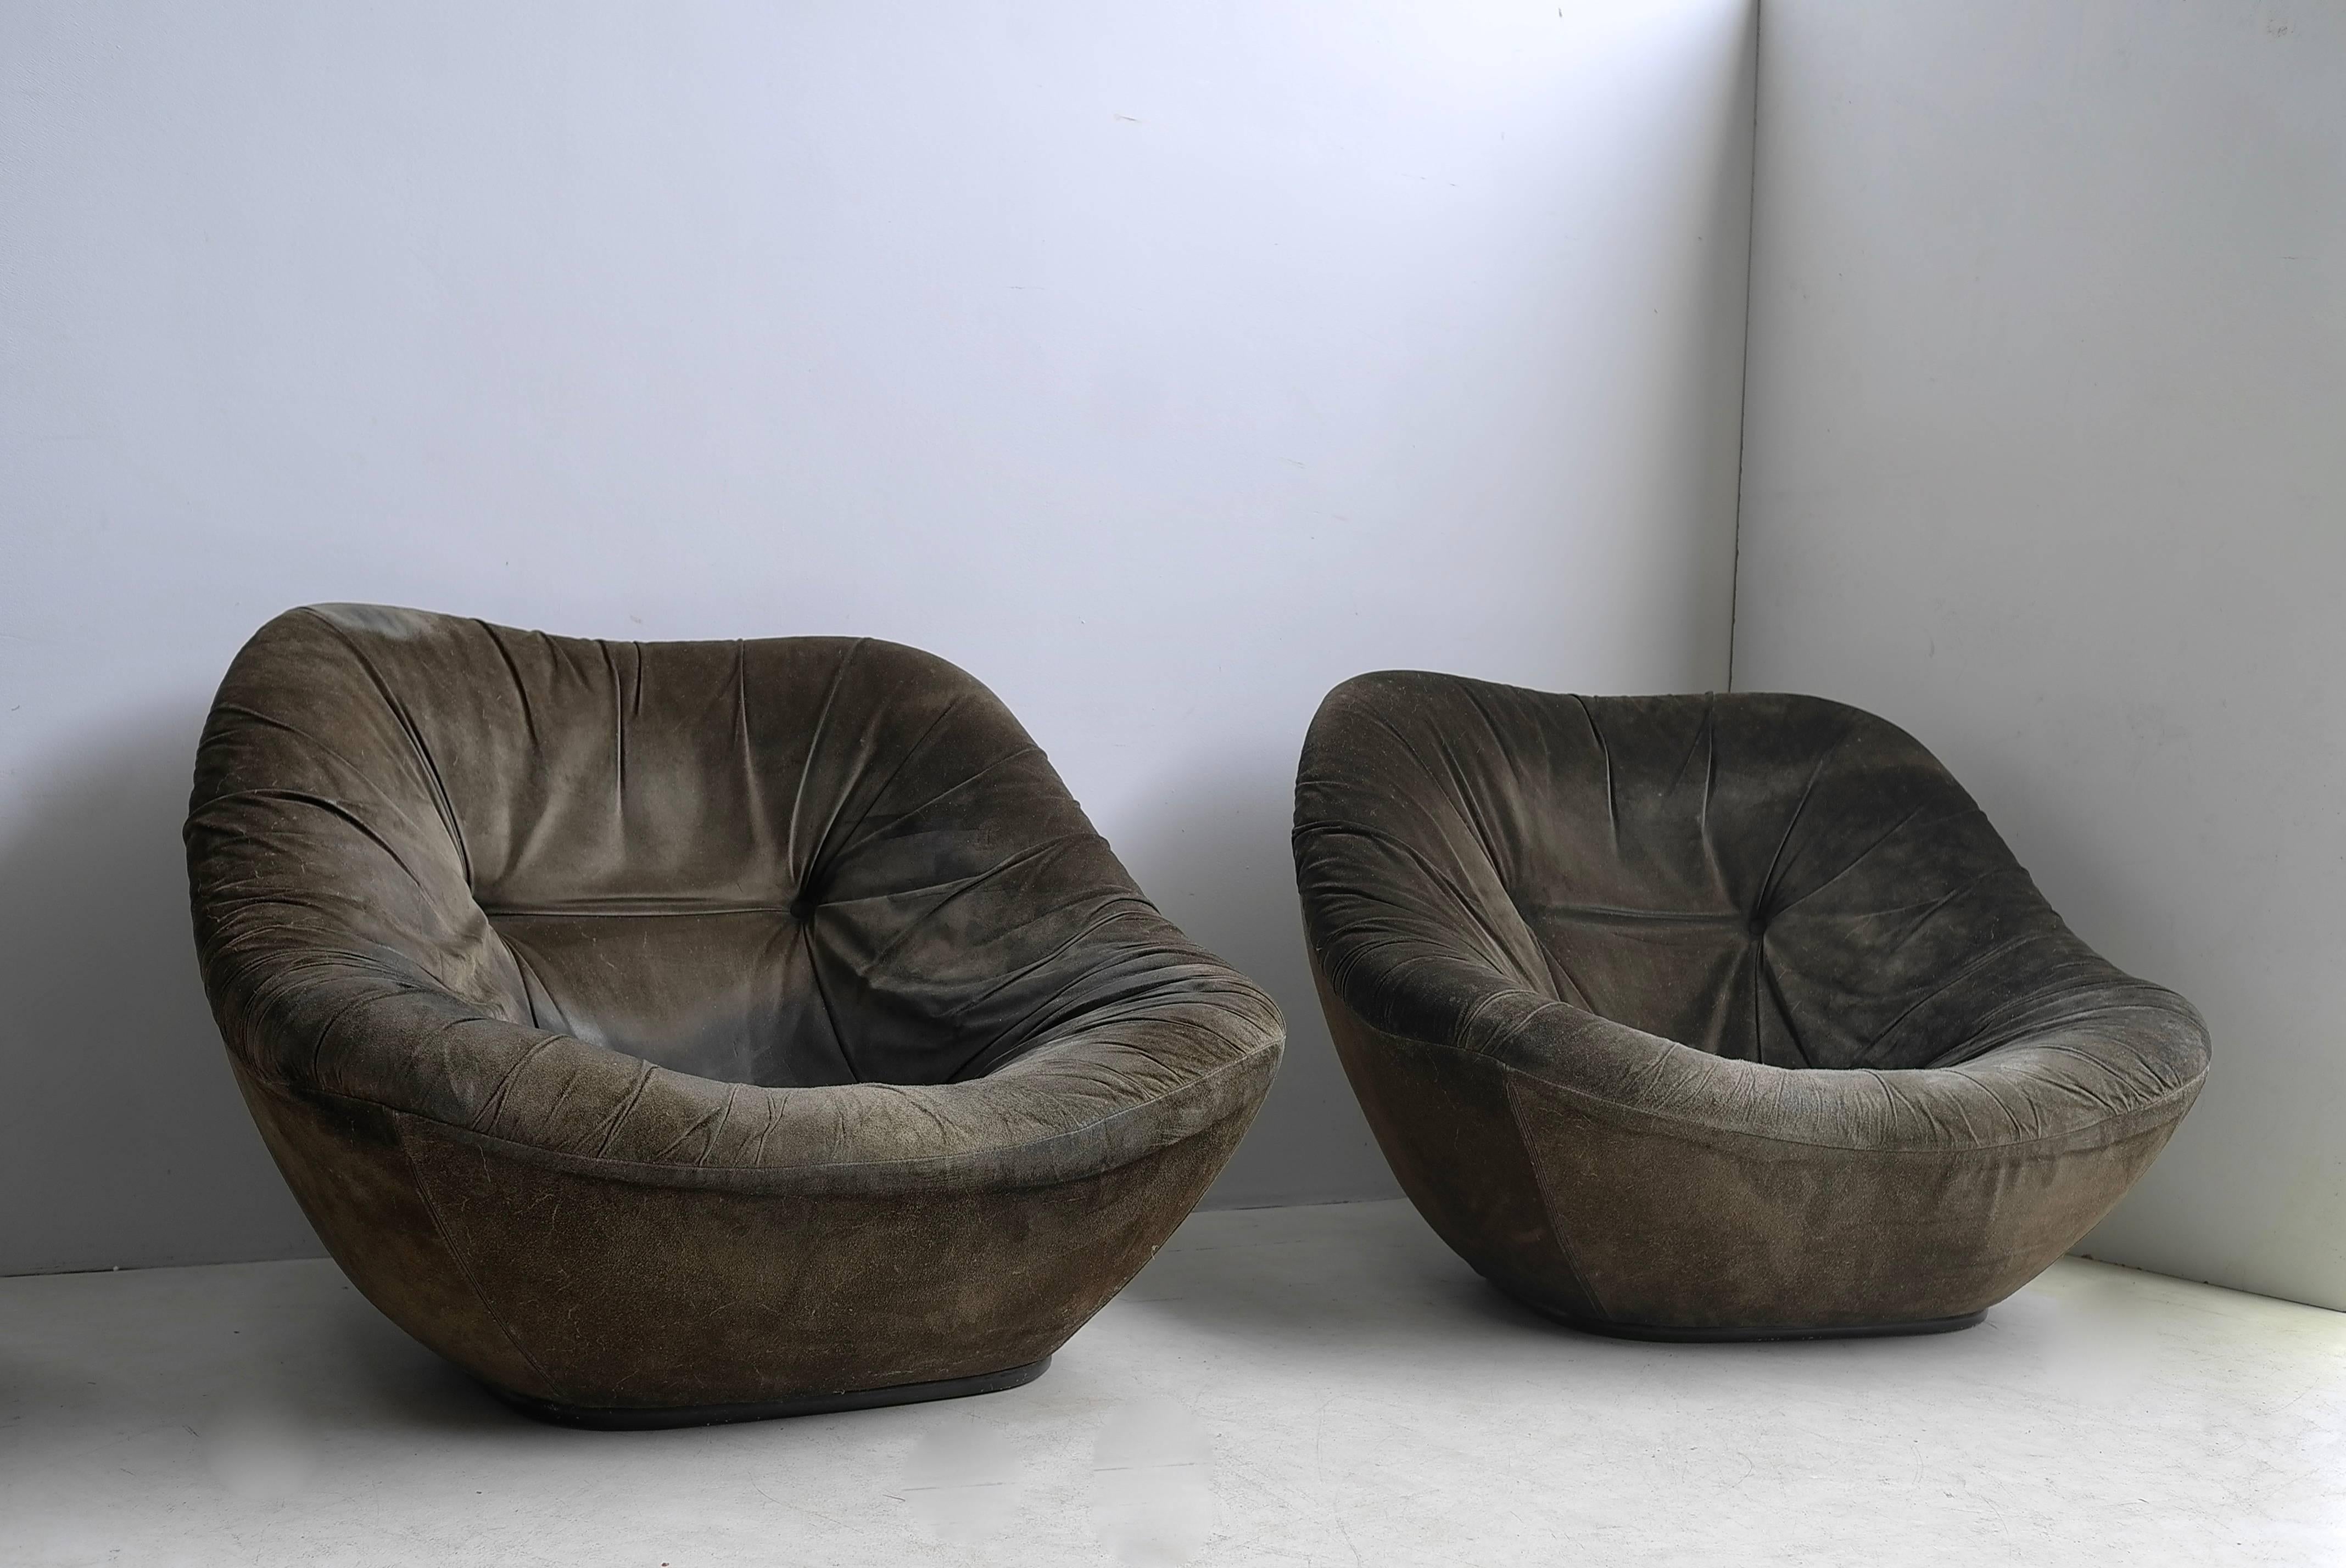 Important salon, Pierre Paulin sofa with two armchairs model bonnie 500 and 500/2 in suede savannah, sitting on a cloud.

The sofa 500/2 is described in the Artifort books but there has never been one for sale or any known to exist, museum